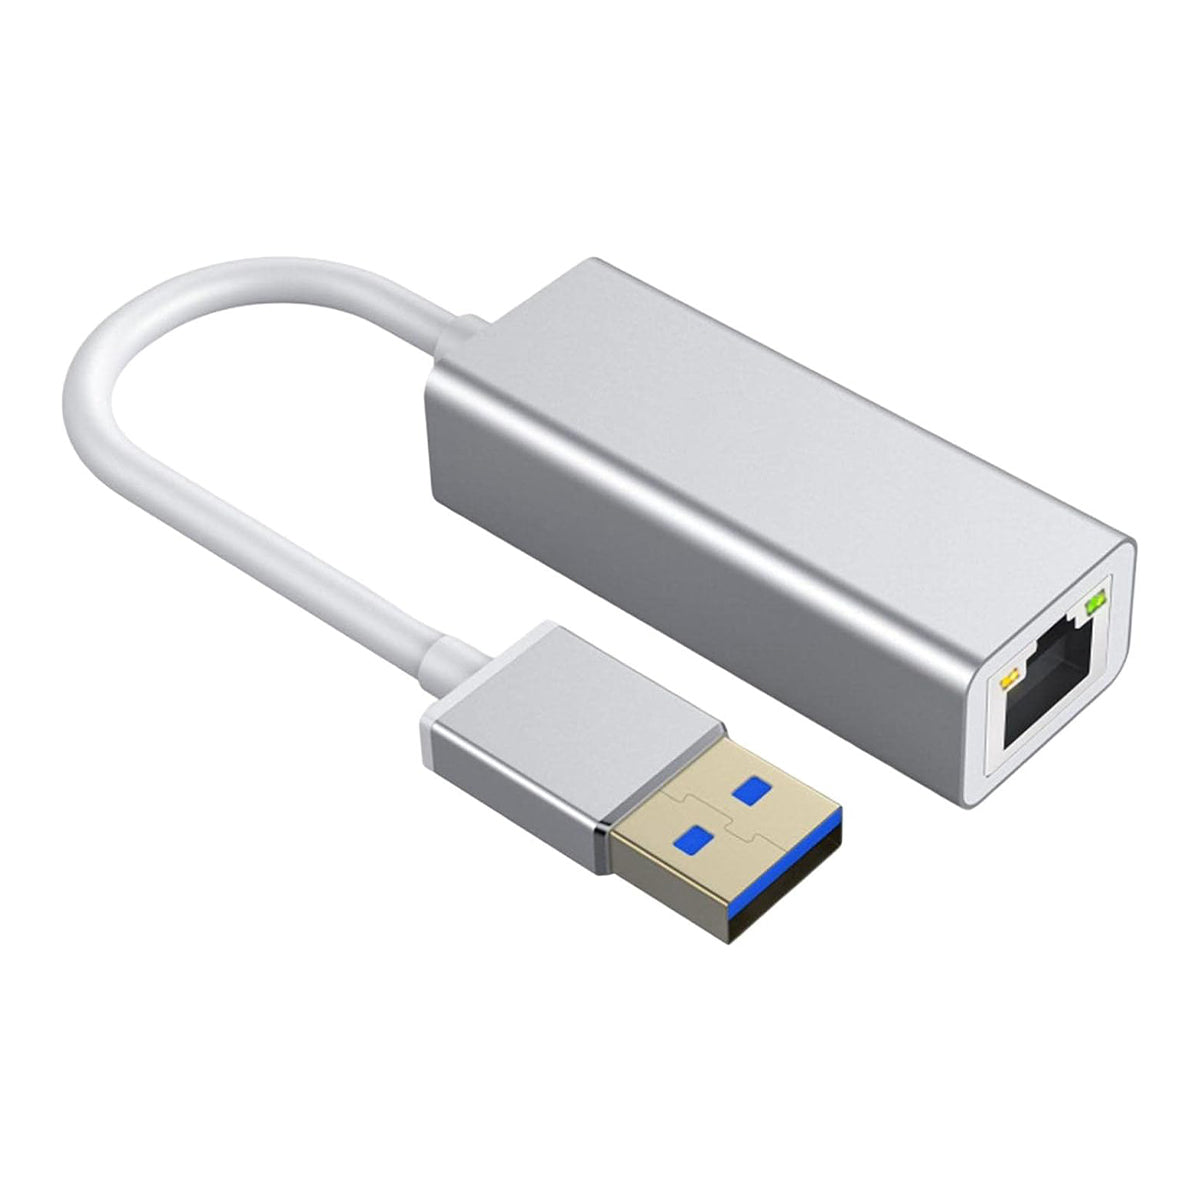 Ethernet Adapter Compatible with Laptops, USB Ethernet Adapter USB to RJ45, Ethernet Adapter Converter